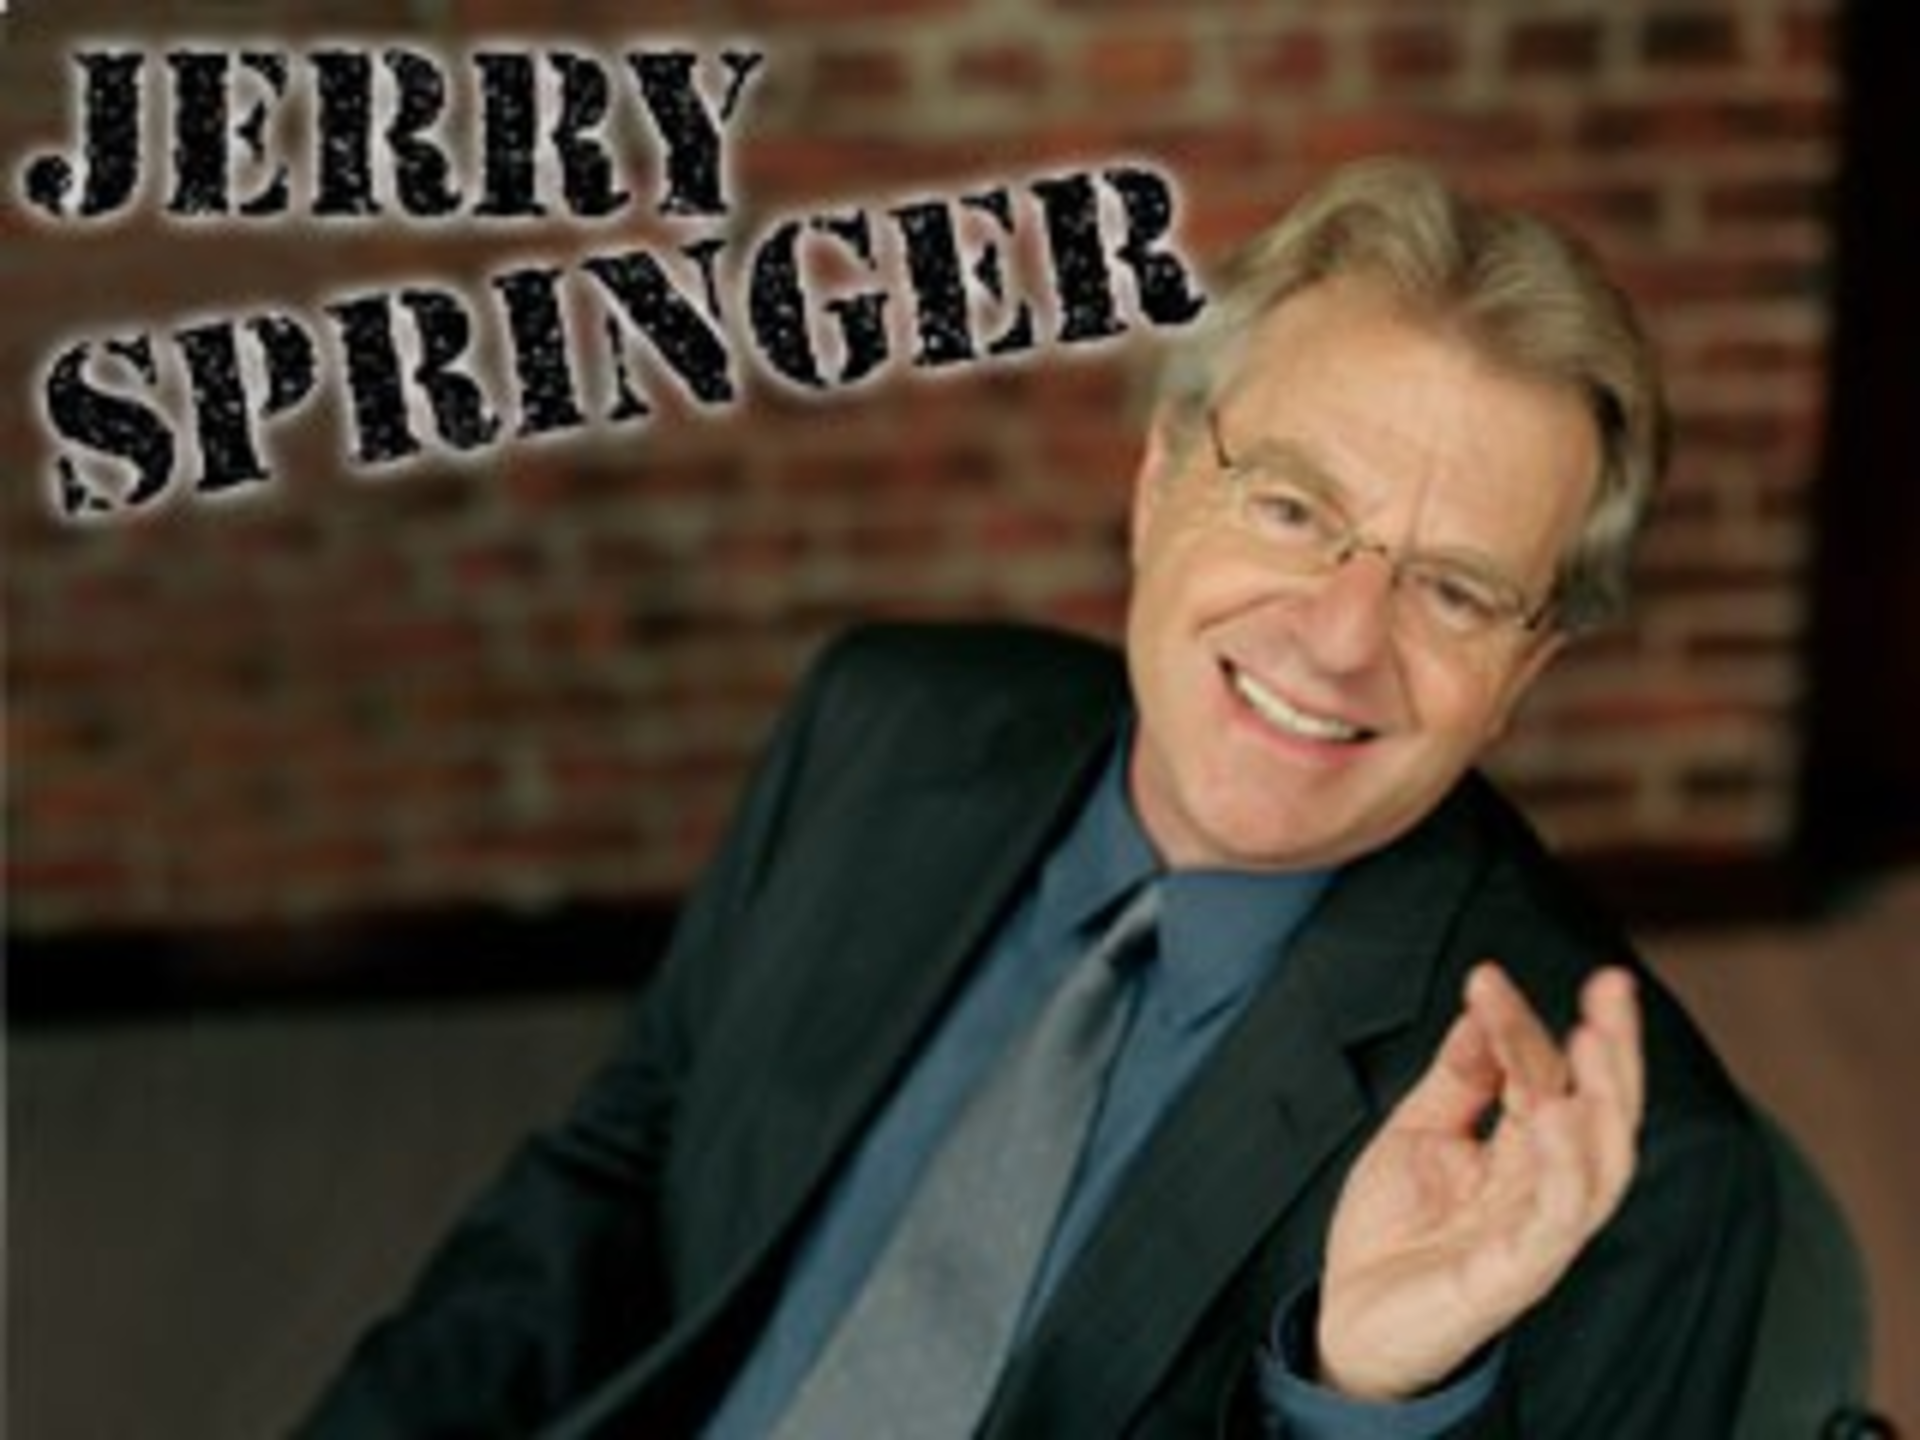 Update Jerry Springers not coming to Kansas City next month after pic photo